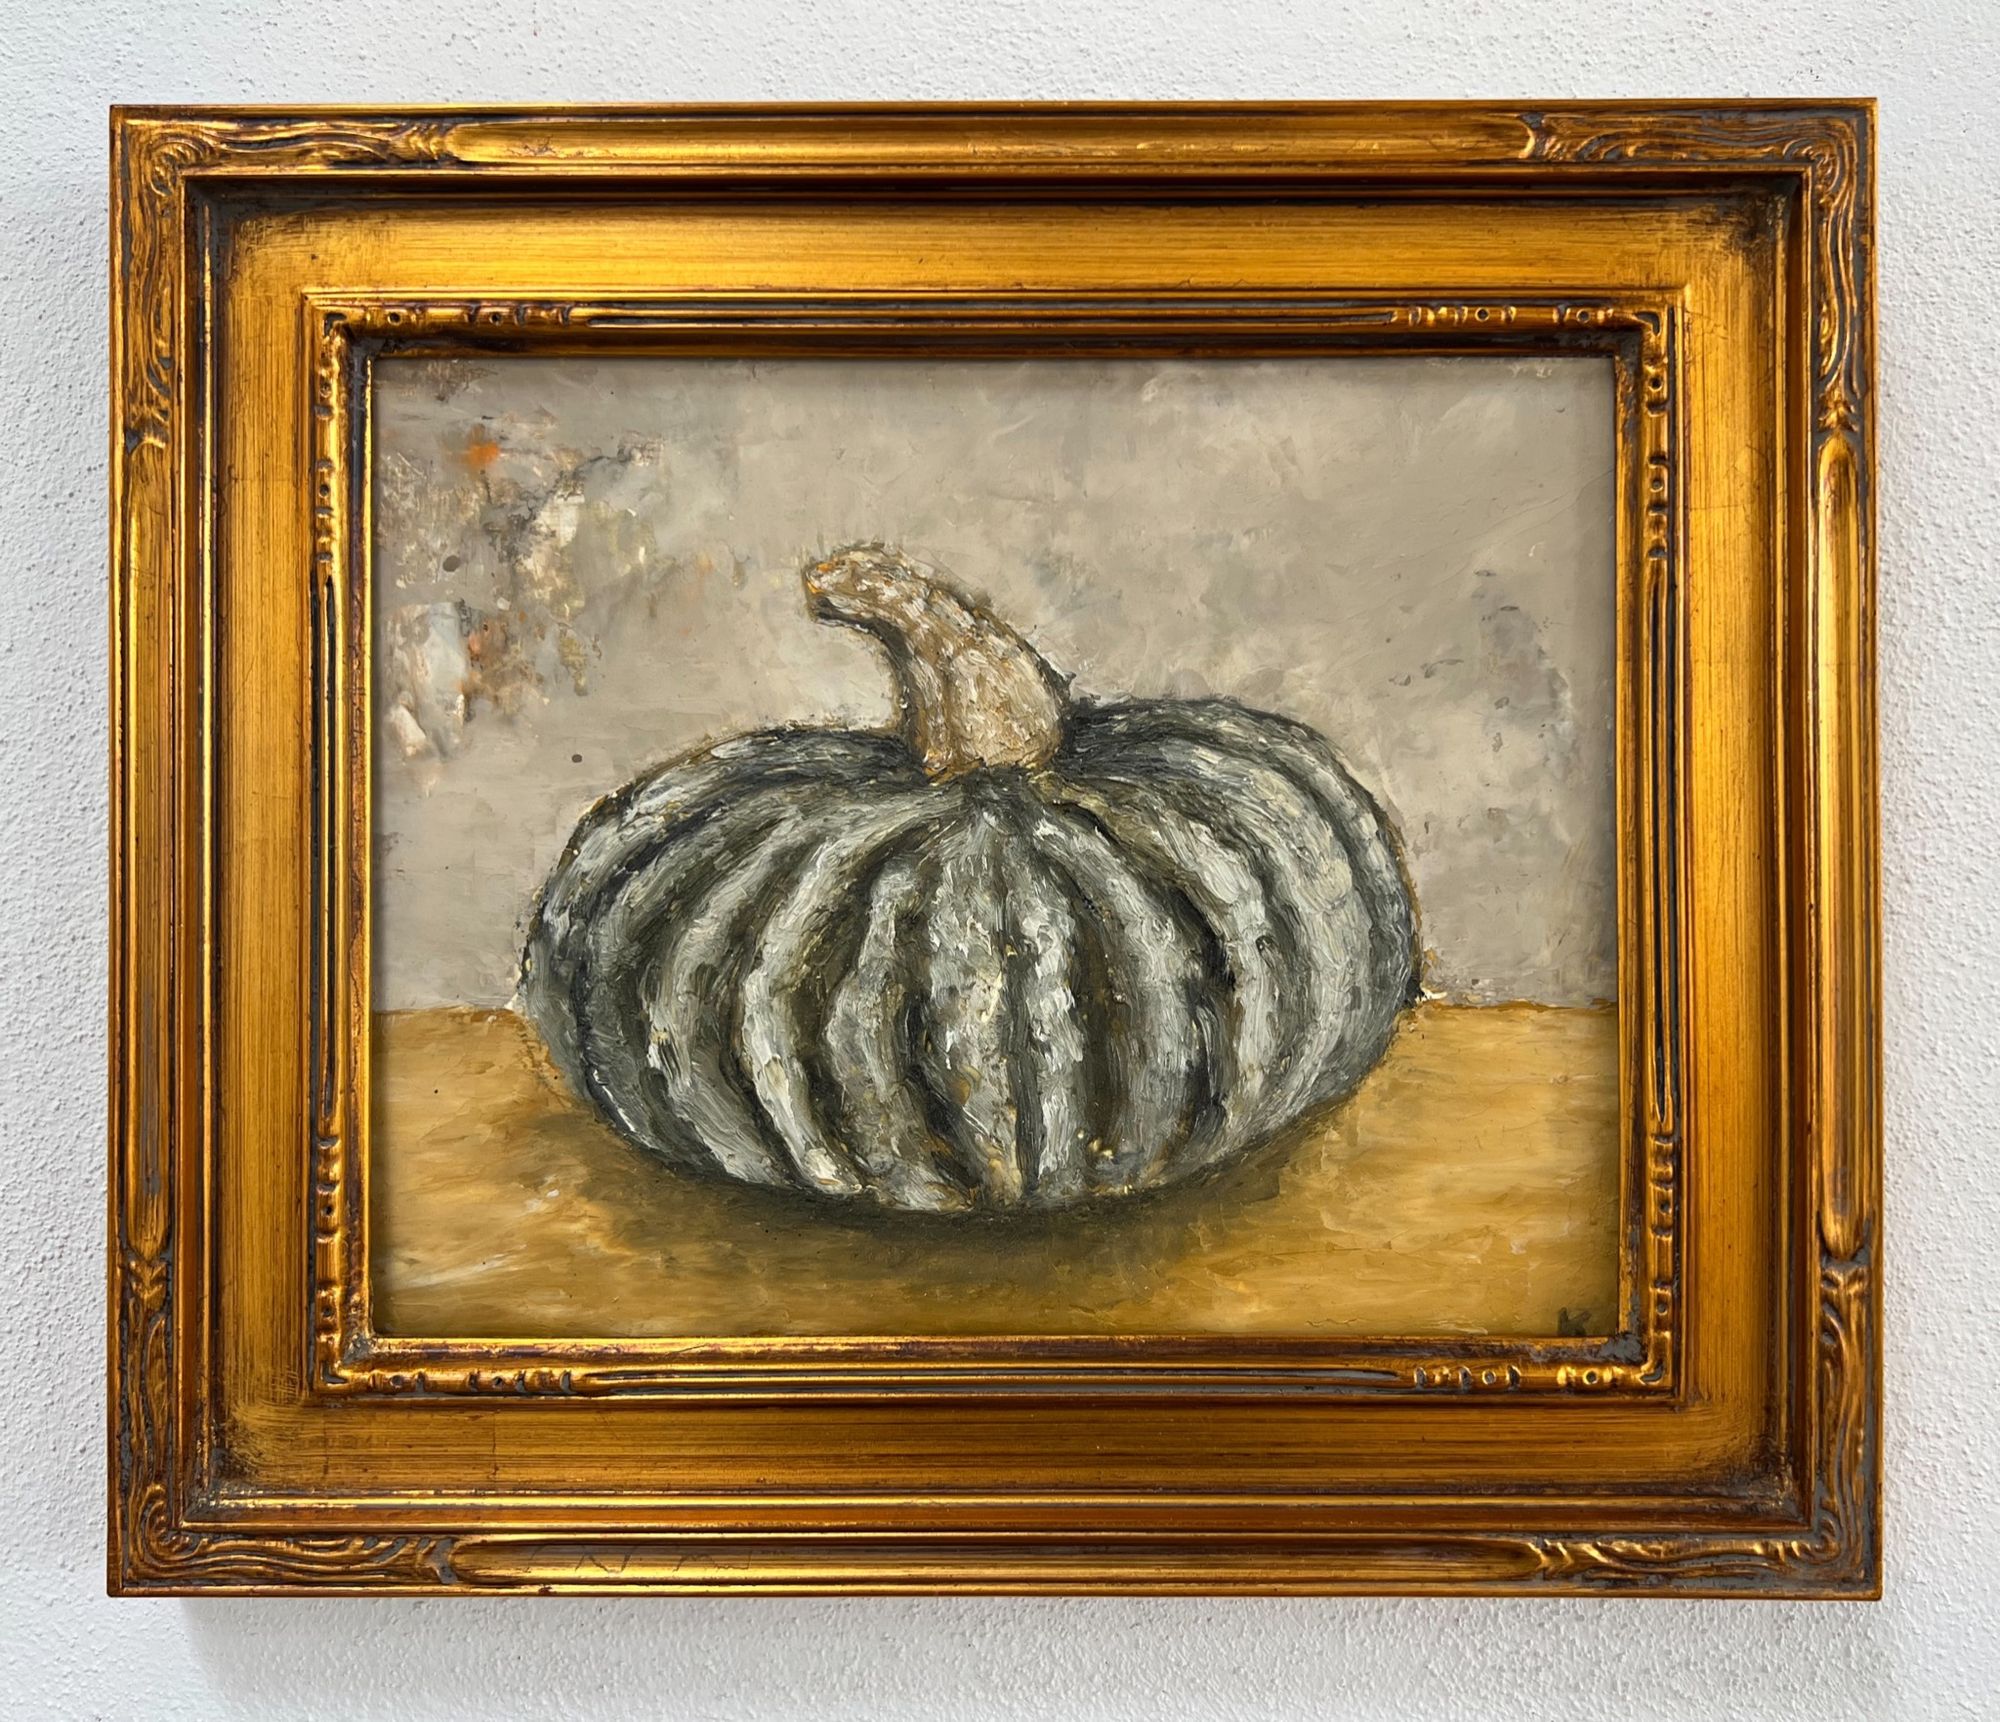 An oil painting of a big round deeply folded green squash centered and taking up most of the frame.